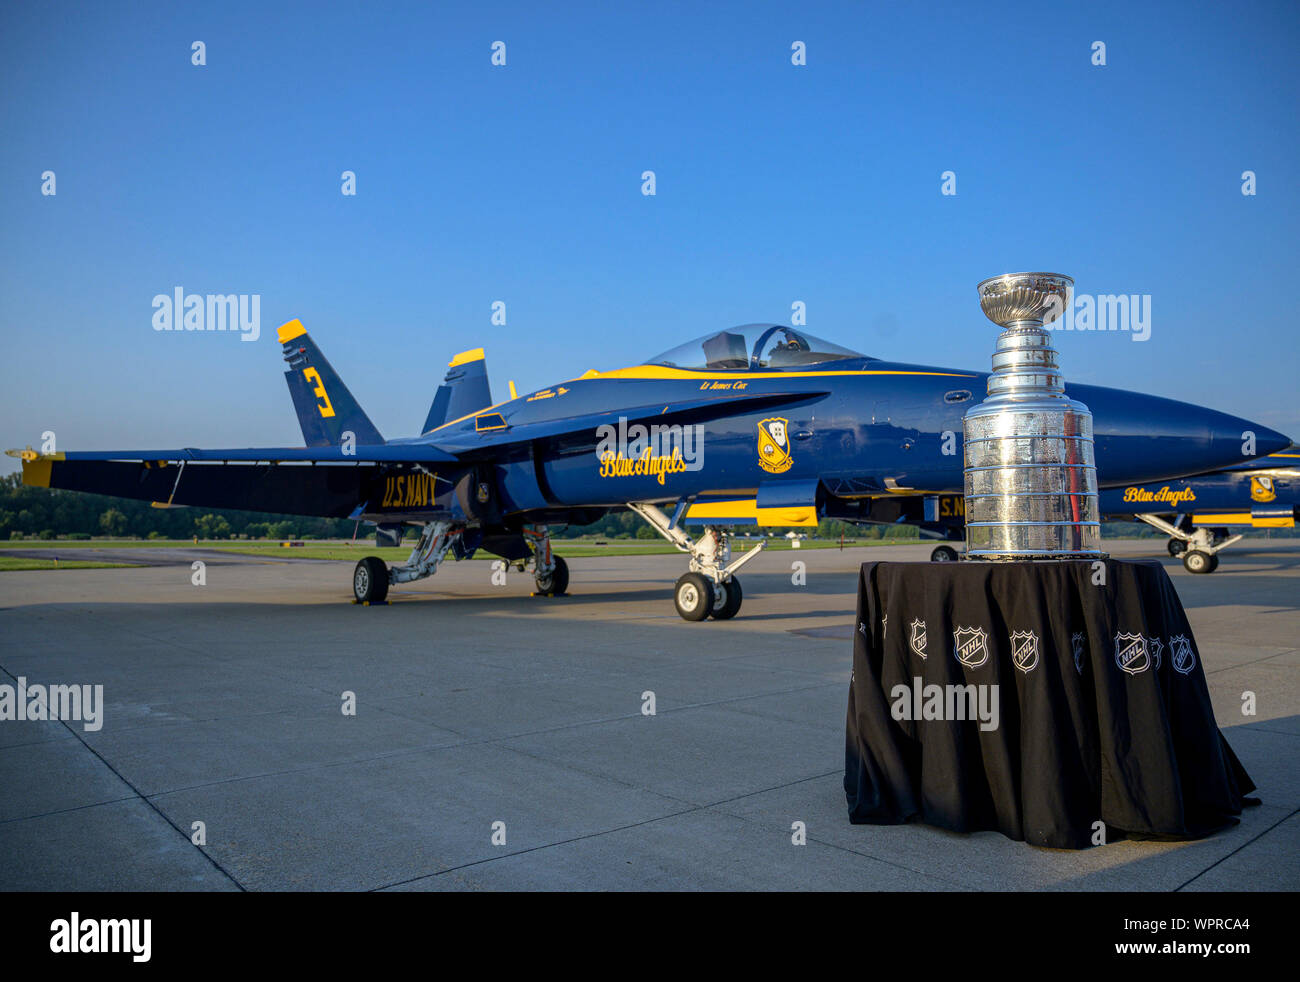 https://c8.alamy.com/comp/WPRCA4/190906-n-jh293-1071-chesterfield-mo-sept-6-2019-the-stanley-cup-which-was-won-by-the-national-hockey-league-team-st-louis-blues-in-the-2019-stanley-cup-final-is-displayed-in-front-of-fa-18-hornets-used-by-the-us-navy-flight-demonstration-squadron-the-blue-angels-during-st-louis-navy-week-sept-6-2019-the-navy-week-program-serves-as-the-navys-principle-outreach-effort-in-areas-of-the-country-without-a-significant-navy-presence-us-navy-photo-by-mass-communication-specialist-1st-class-chris-williamsonreleased-WPRCA4.jpg